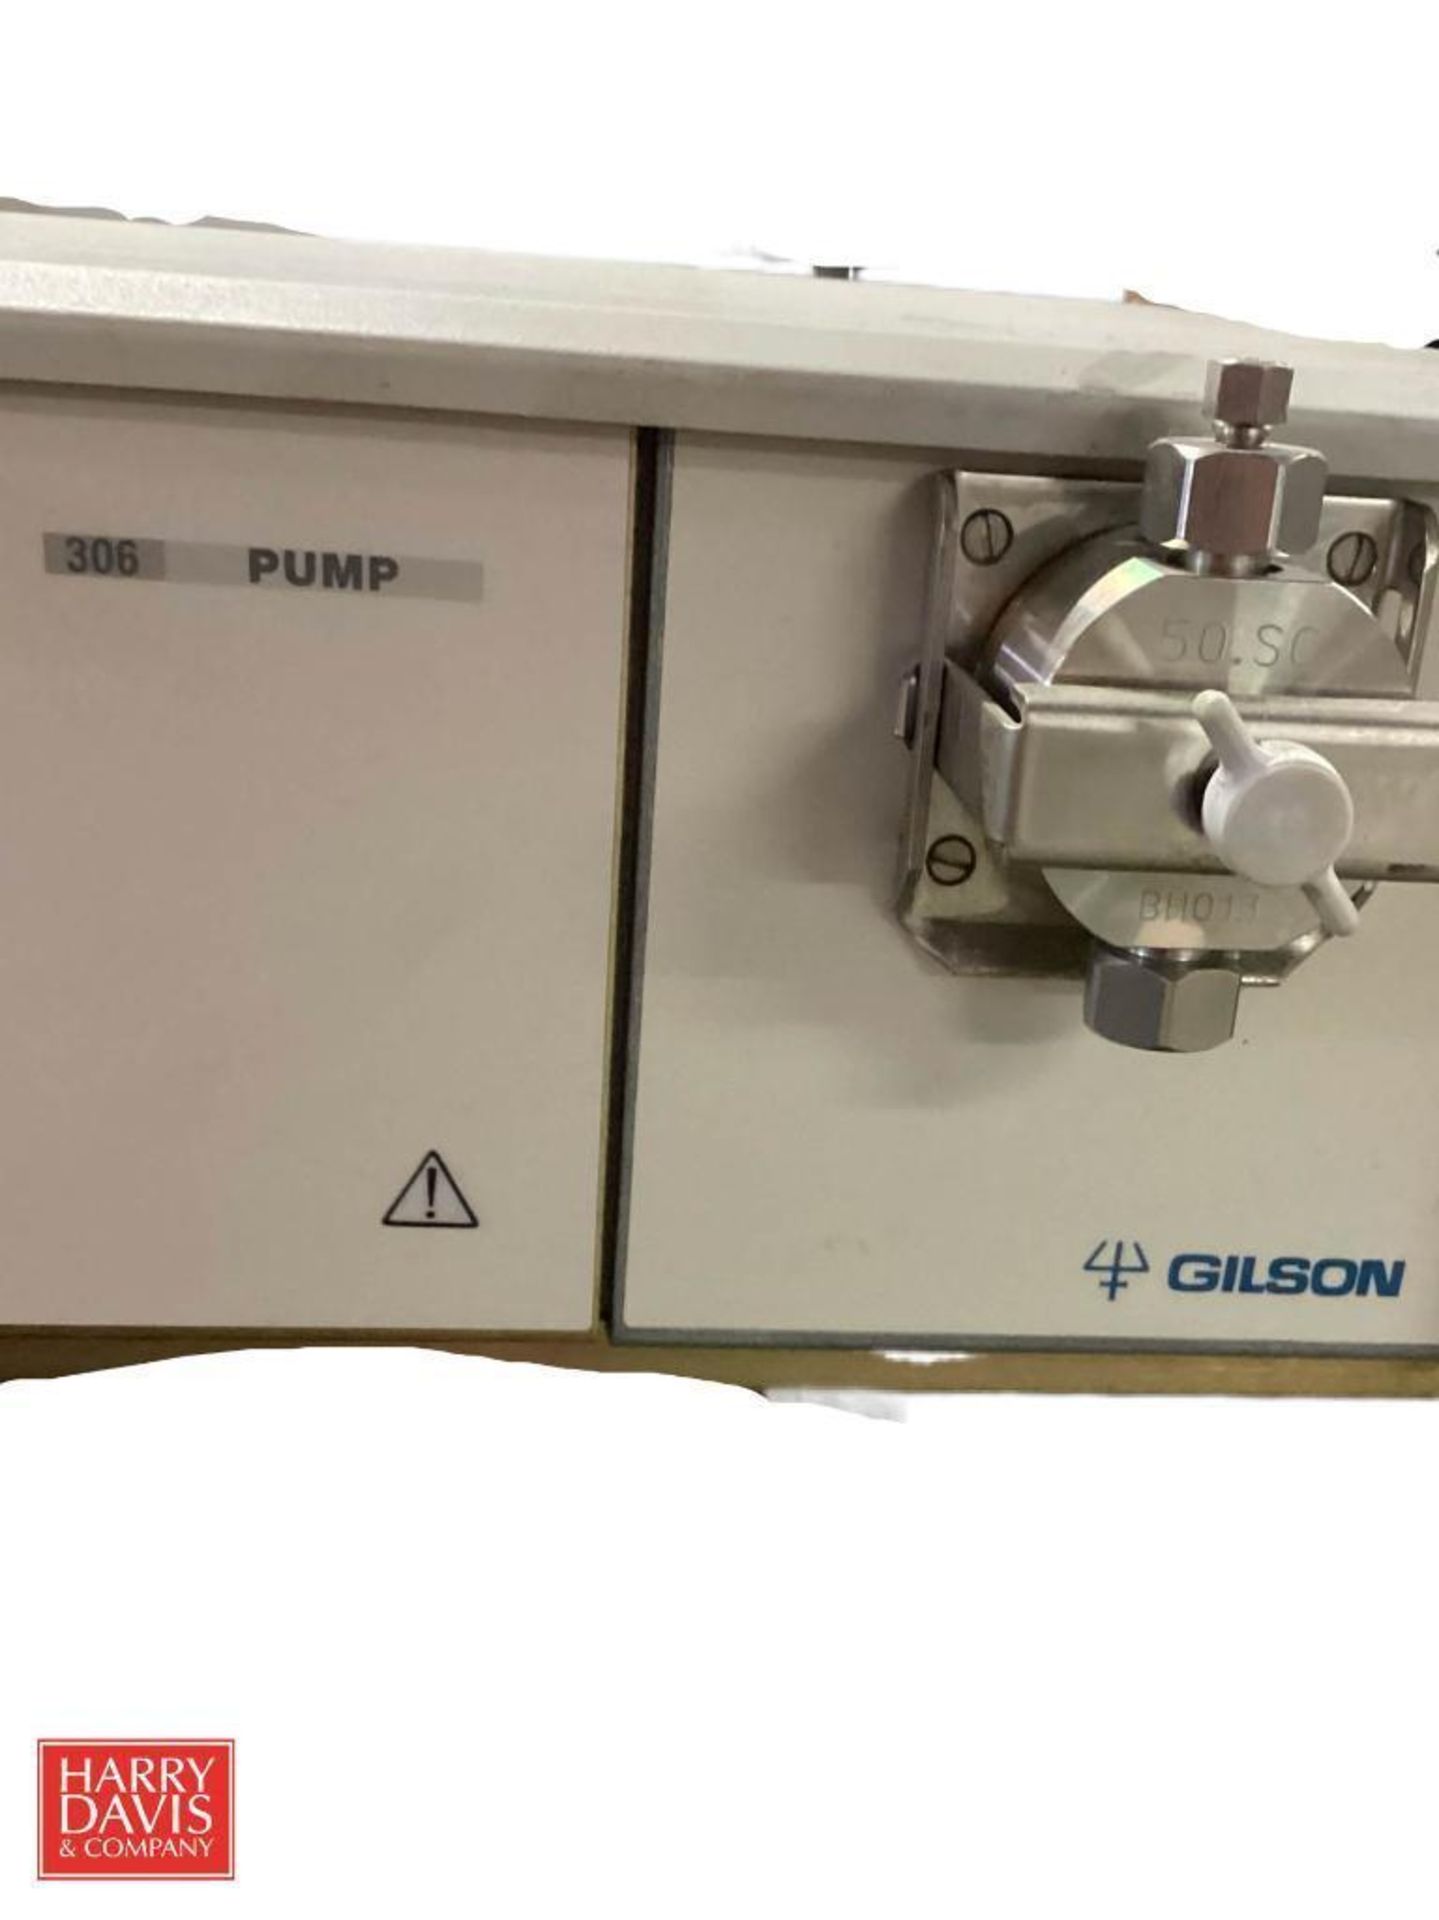 Gilson 215 Liquid Handler with Models 515, 811C, 306, 819 and UV/VIS-155 - Image 5 of 8